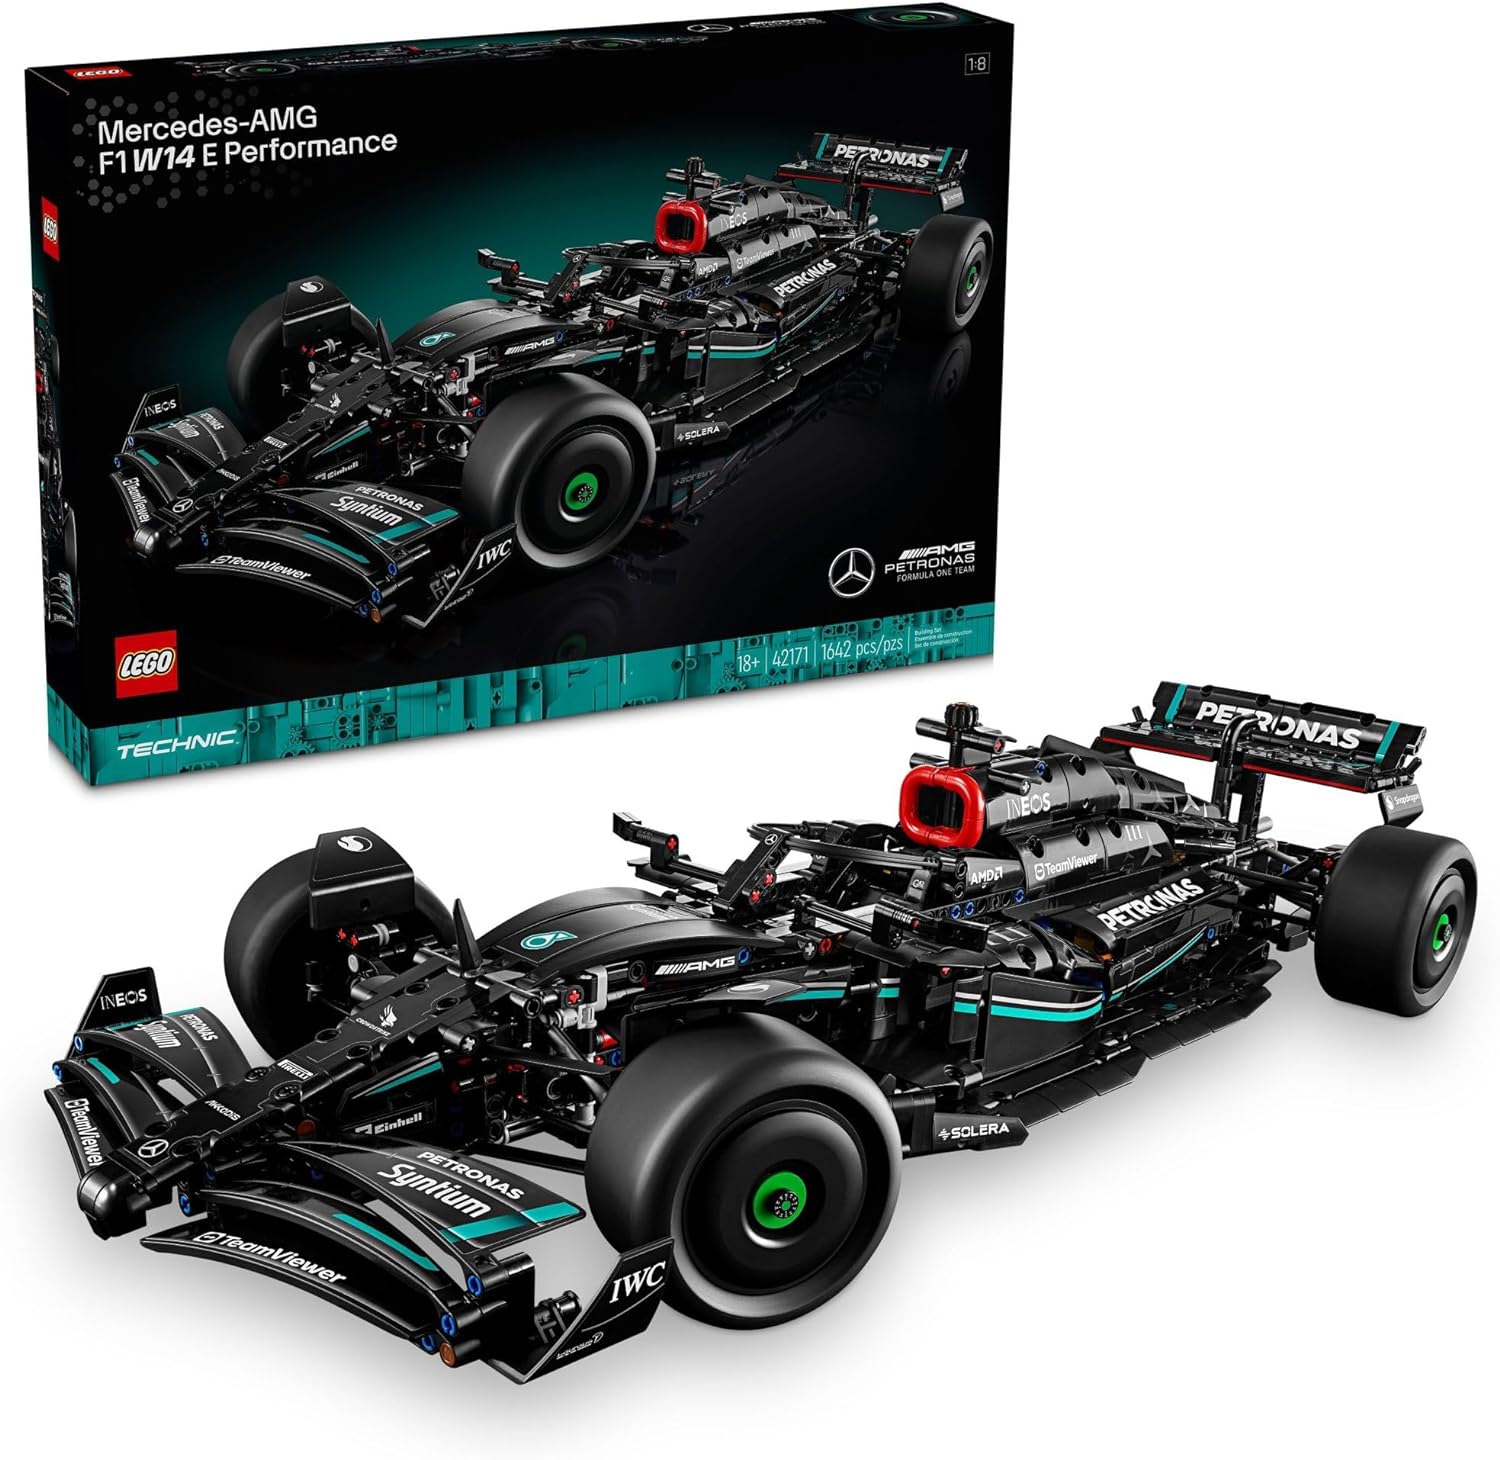 LEGO 42171 Technic Mercedes-AMG F1 W14 E Performance Race Car Building Set for Adults, Model Car Gift for Father's Day, Authentically Detailed Build and Display Model for Home or Office Décorز